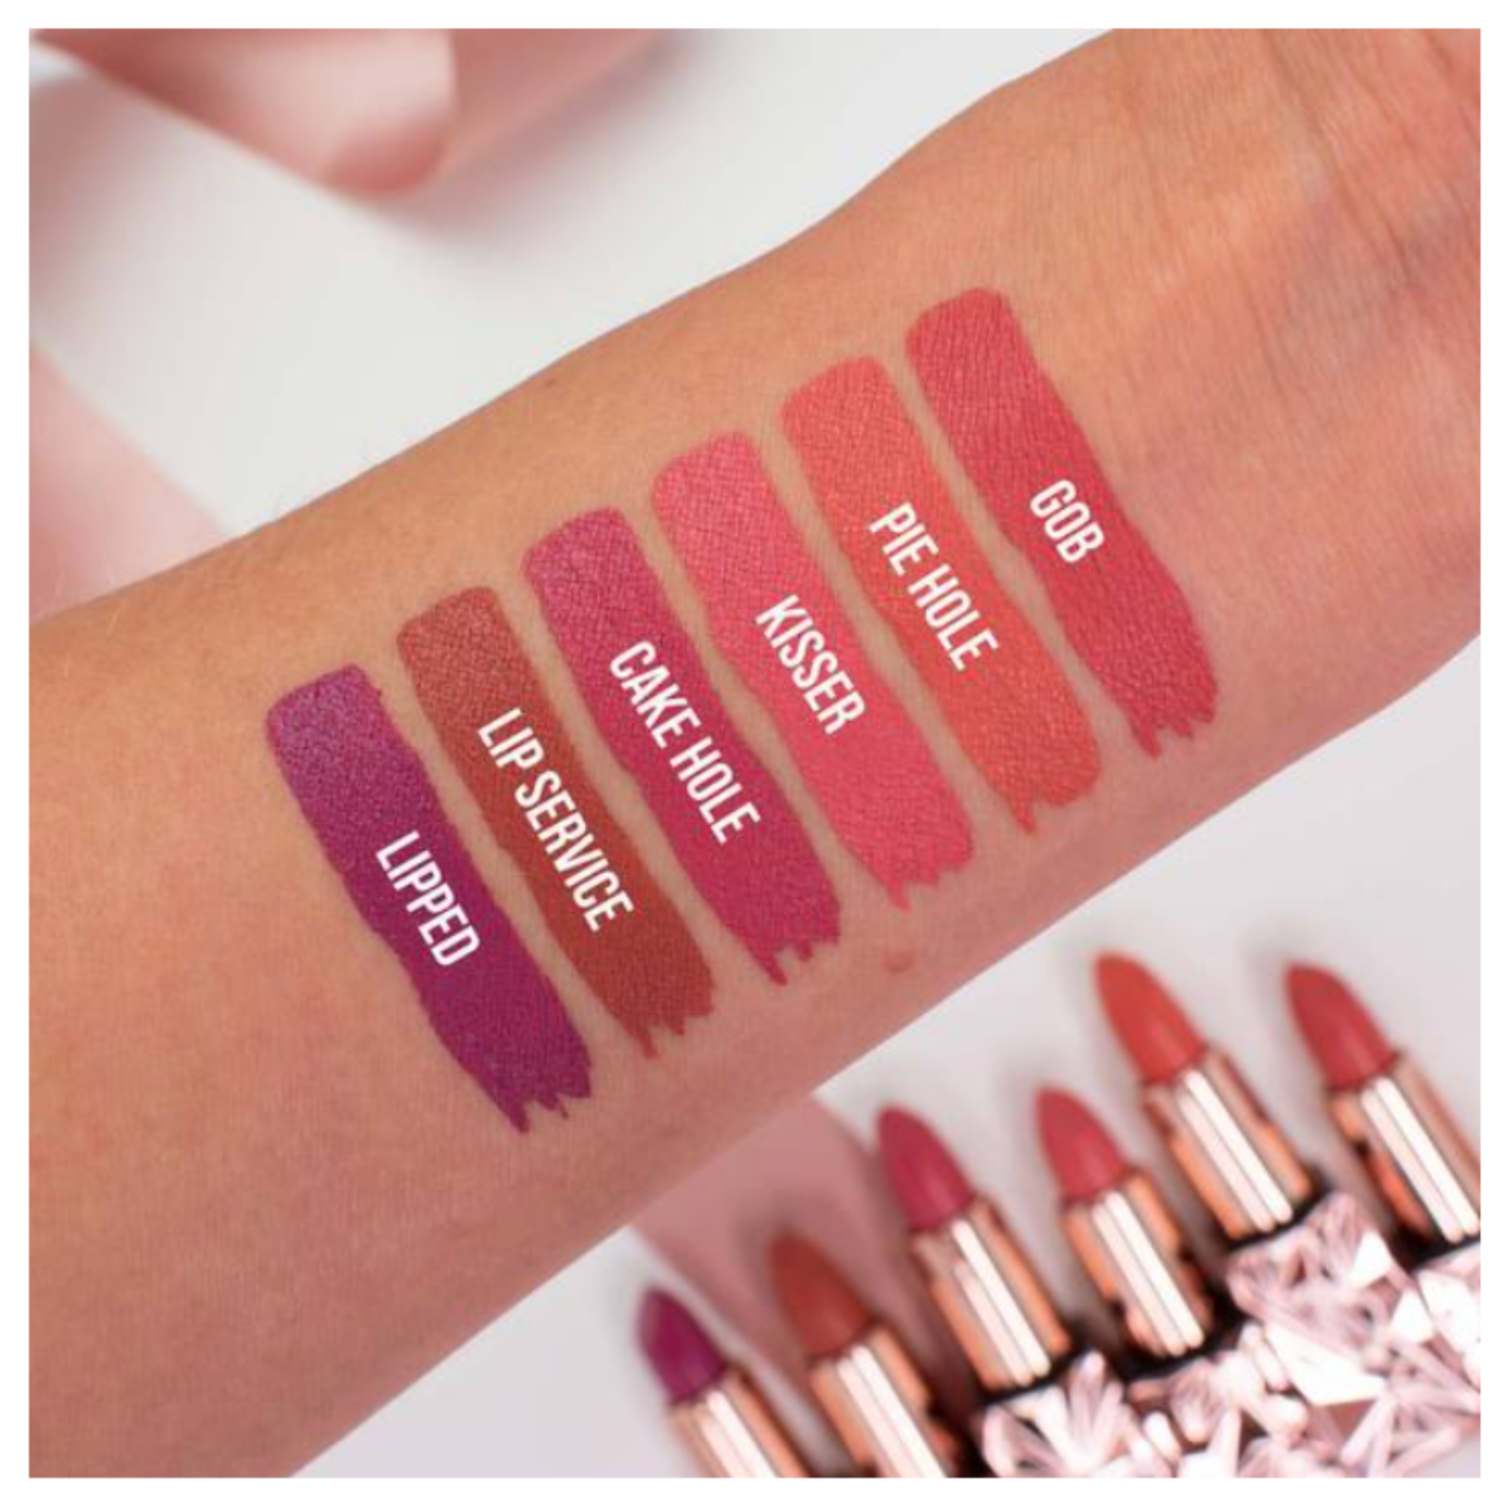 Oh My Glam MOUTH OFF! Lipstick, swatches